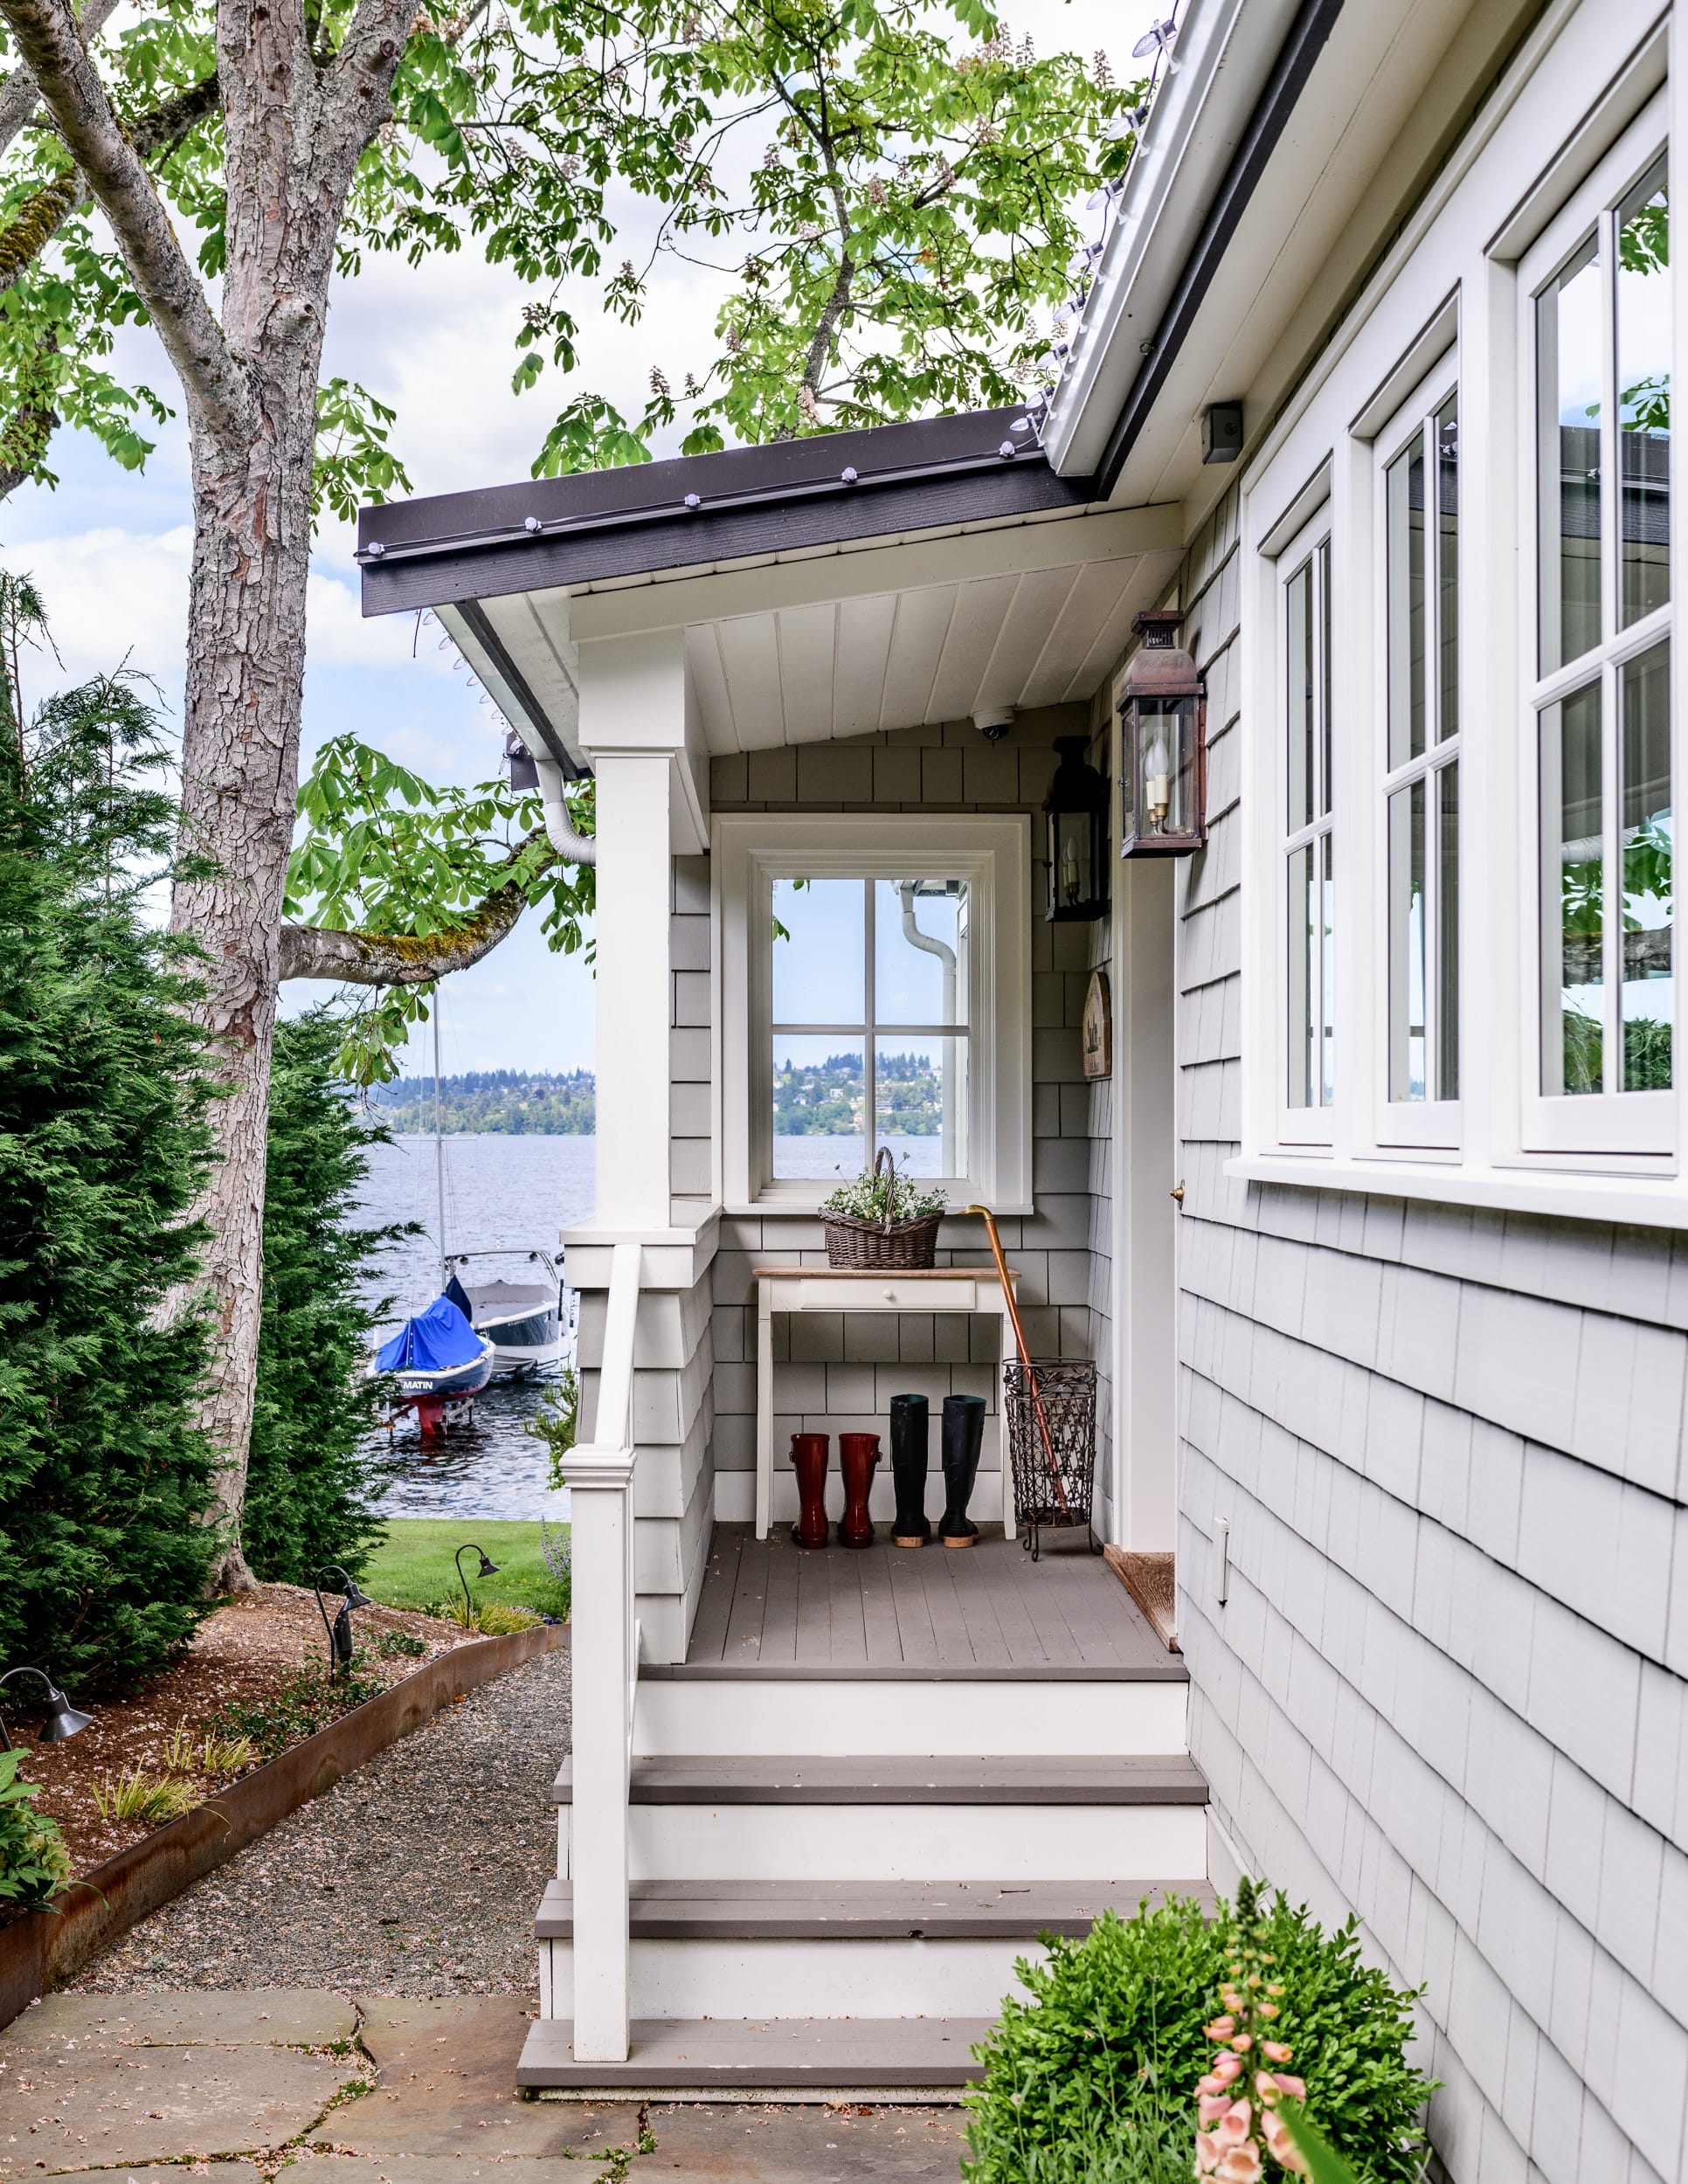 The front porch of a home with a view of the water.